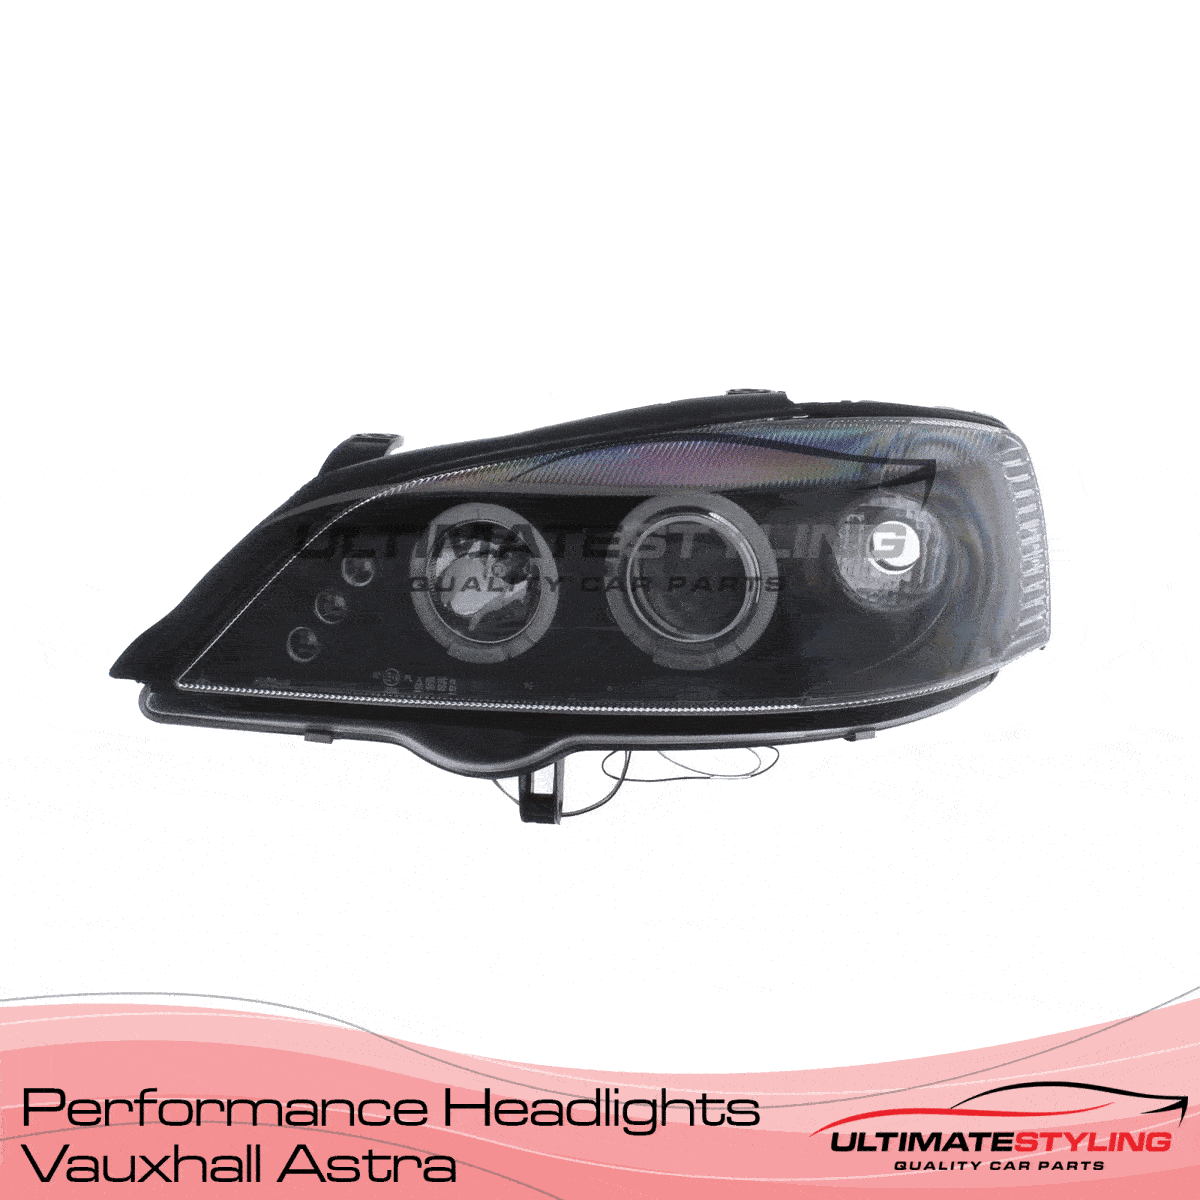 360 view of a Vauxhall Astra aftermarket headlight upgrade